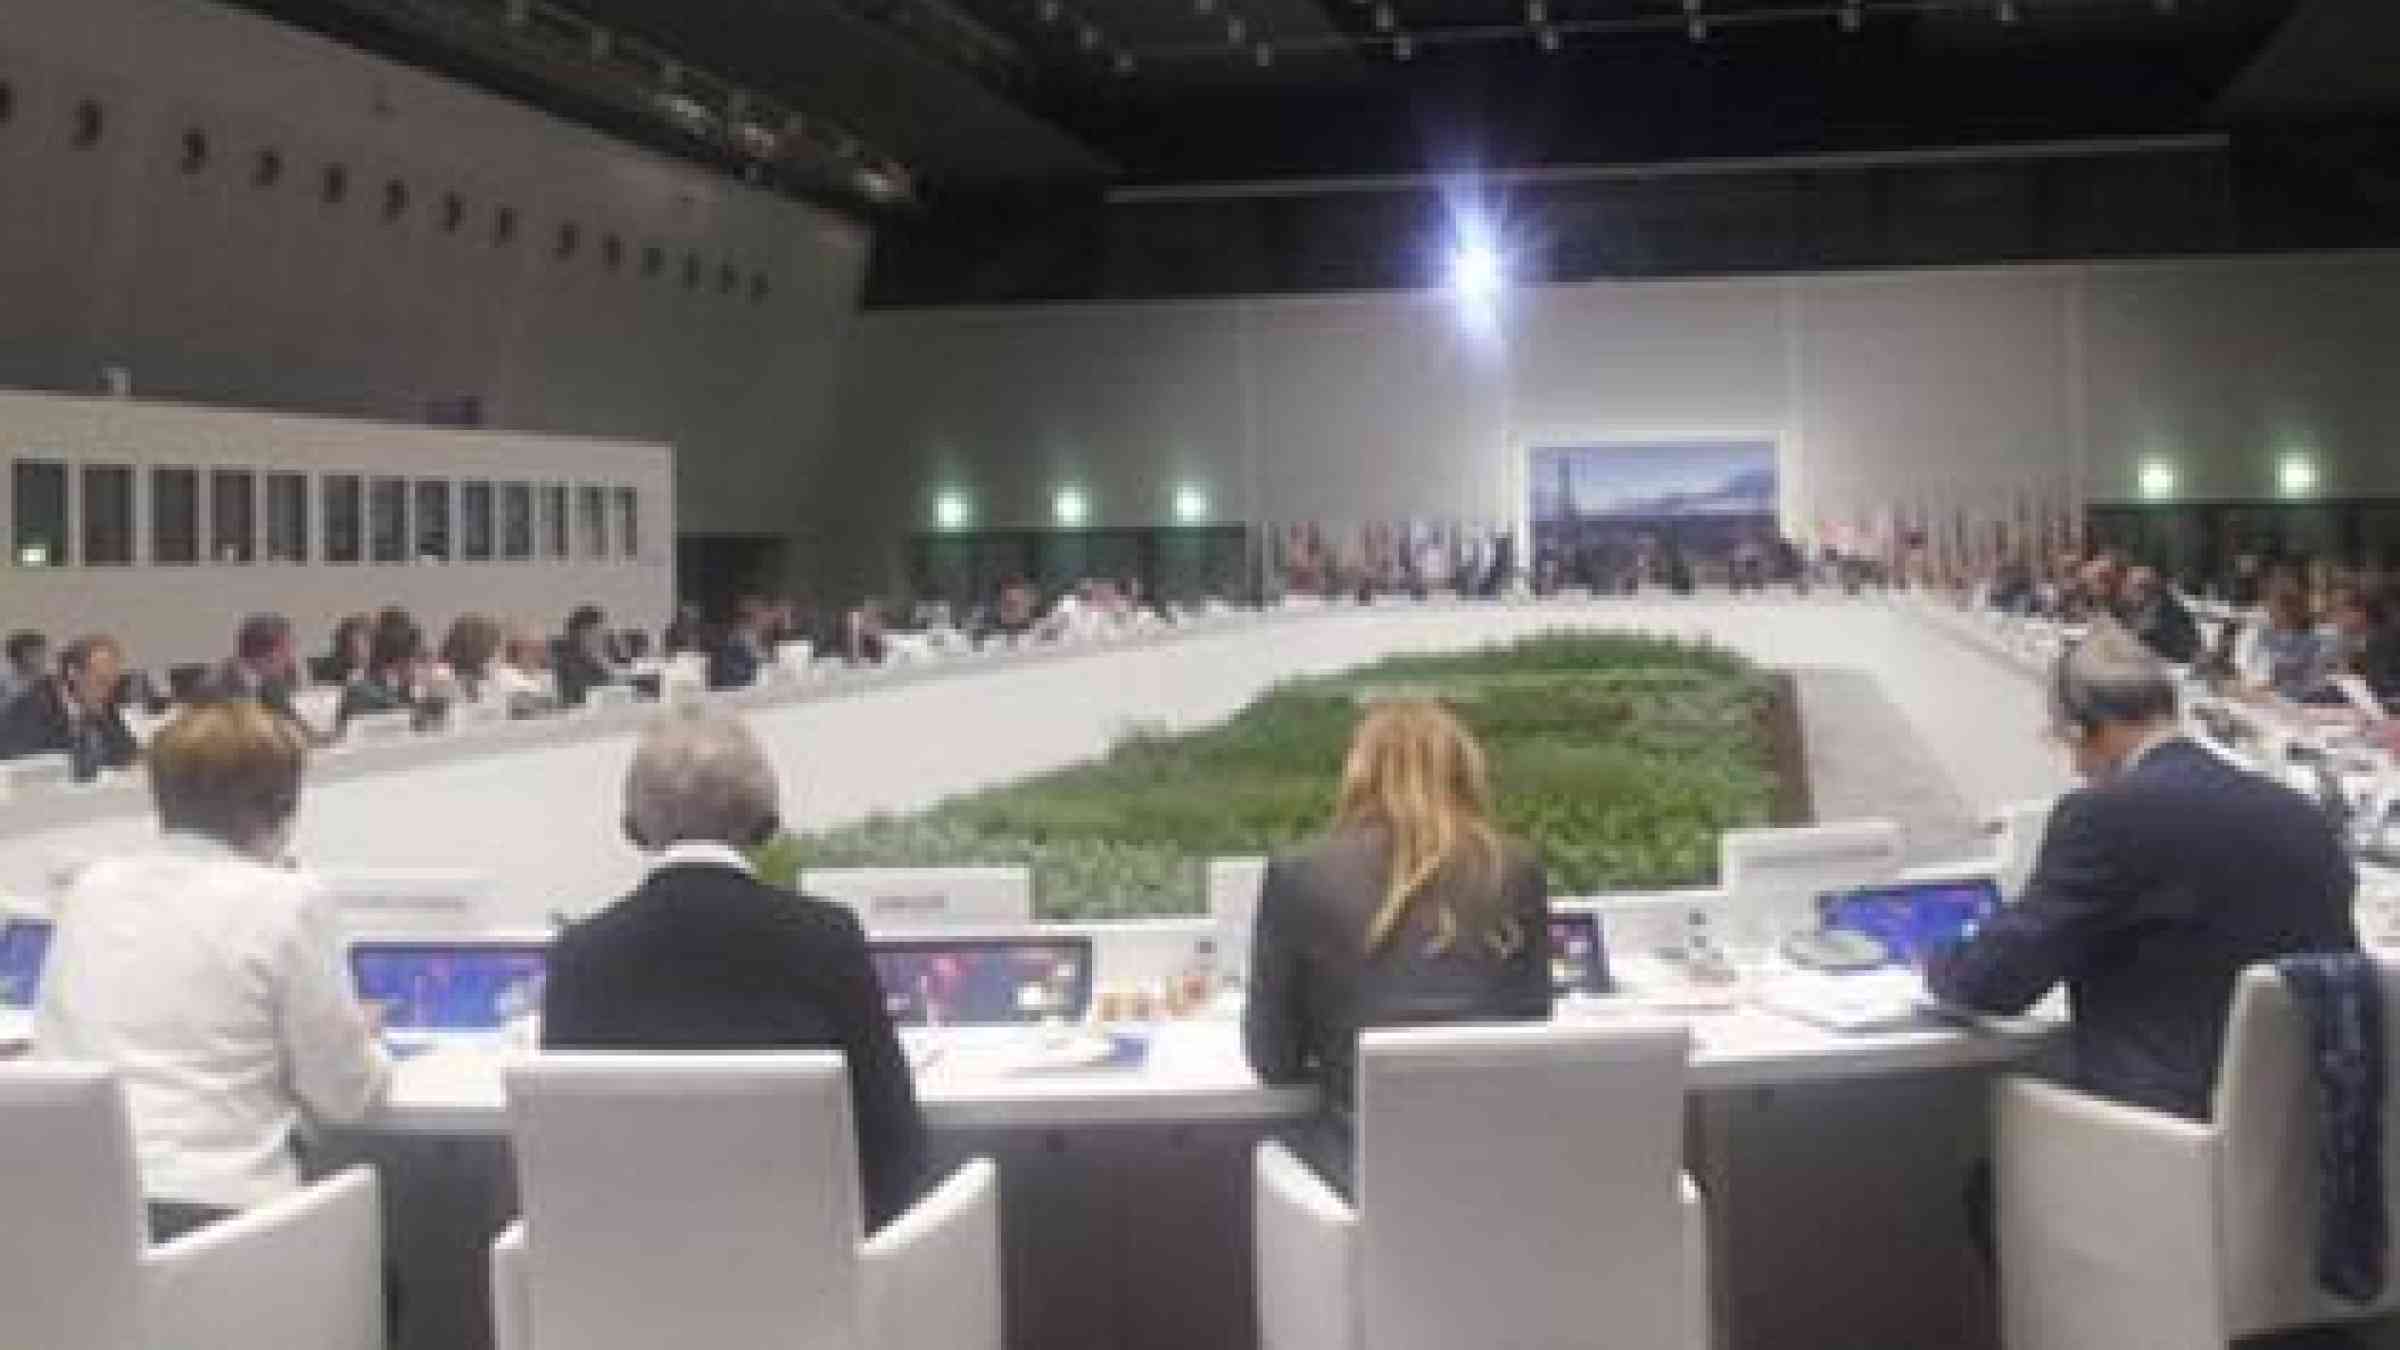 Representatives from 40 countries convened in Milan this week and agreed recommendations for a new global agreement on disaster risk reduction.They were hosted by the Italian Presidency of the EU Council. (Photo: UNISDR)